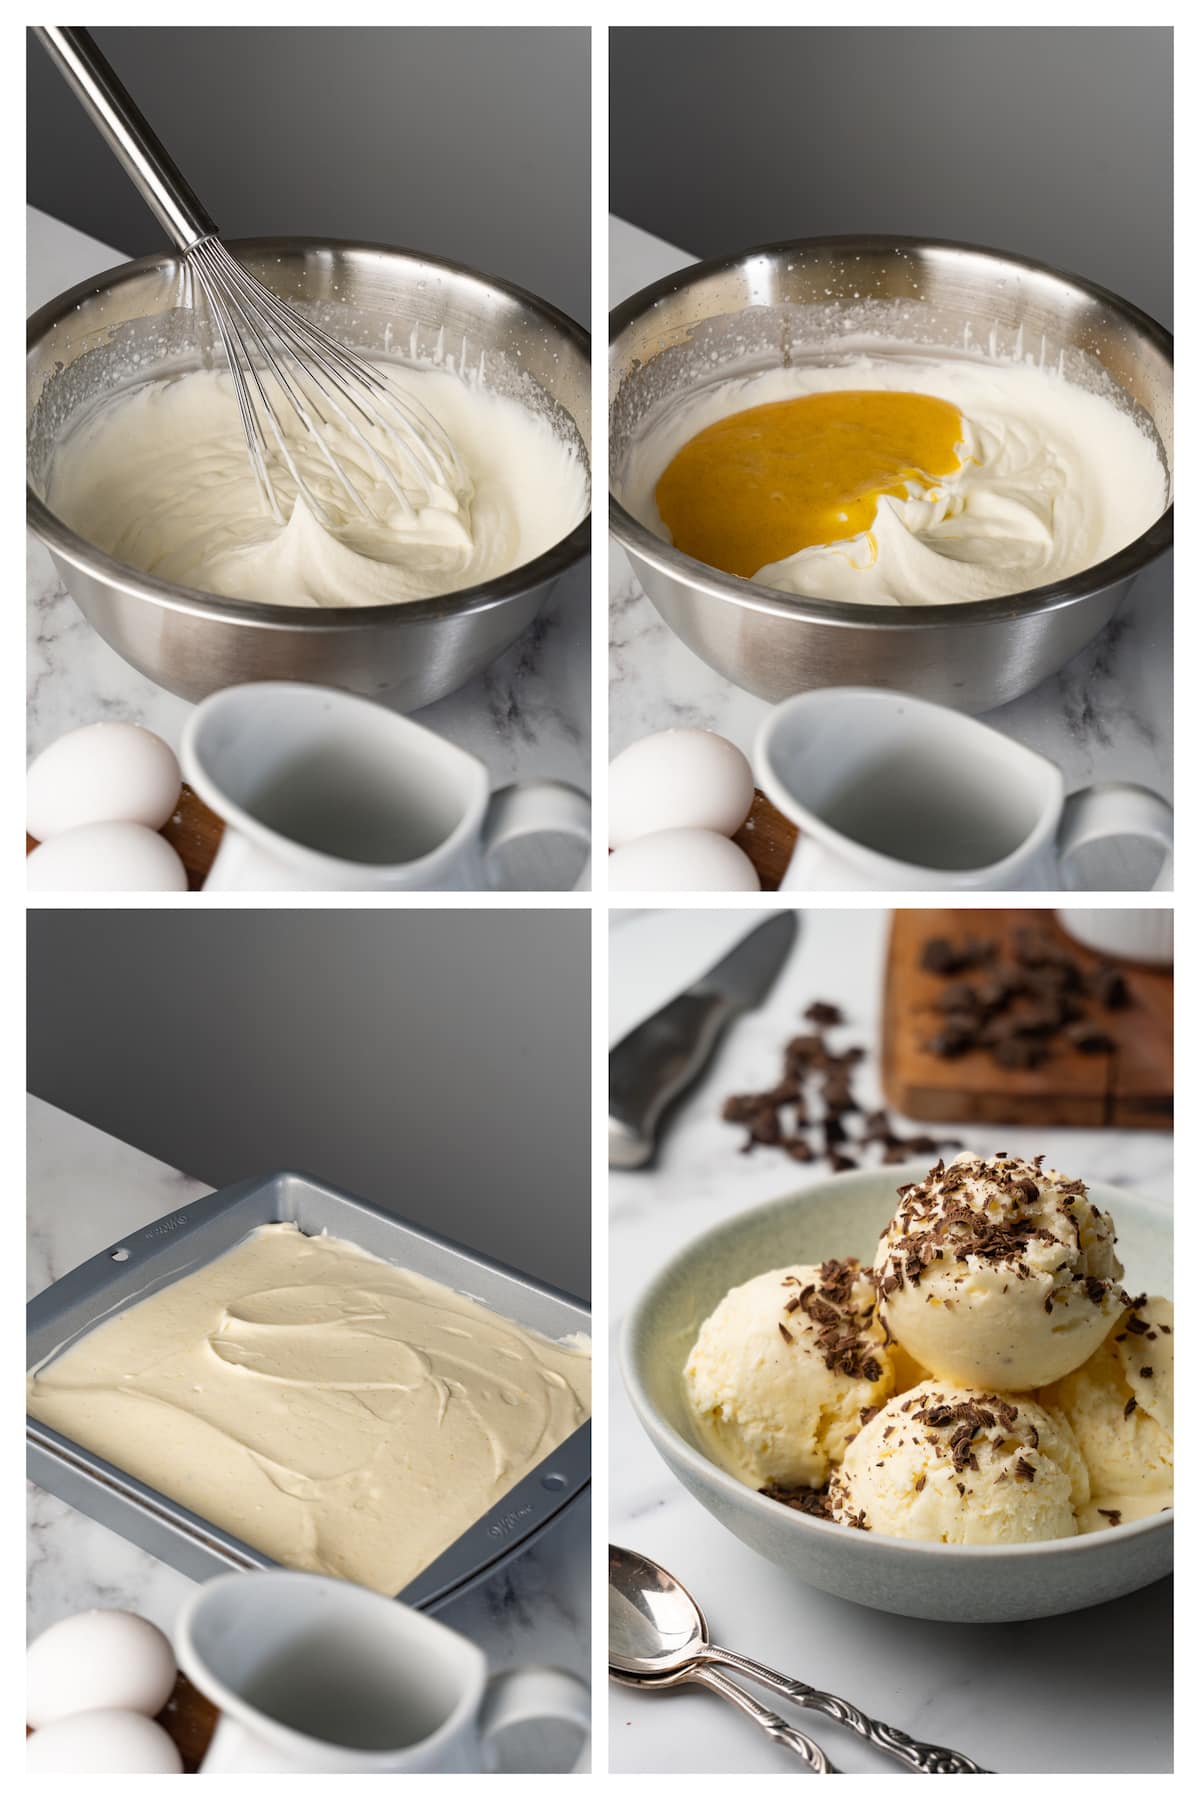 The collage image shows four steps to make vanilla ice cream.